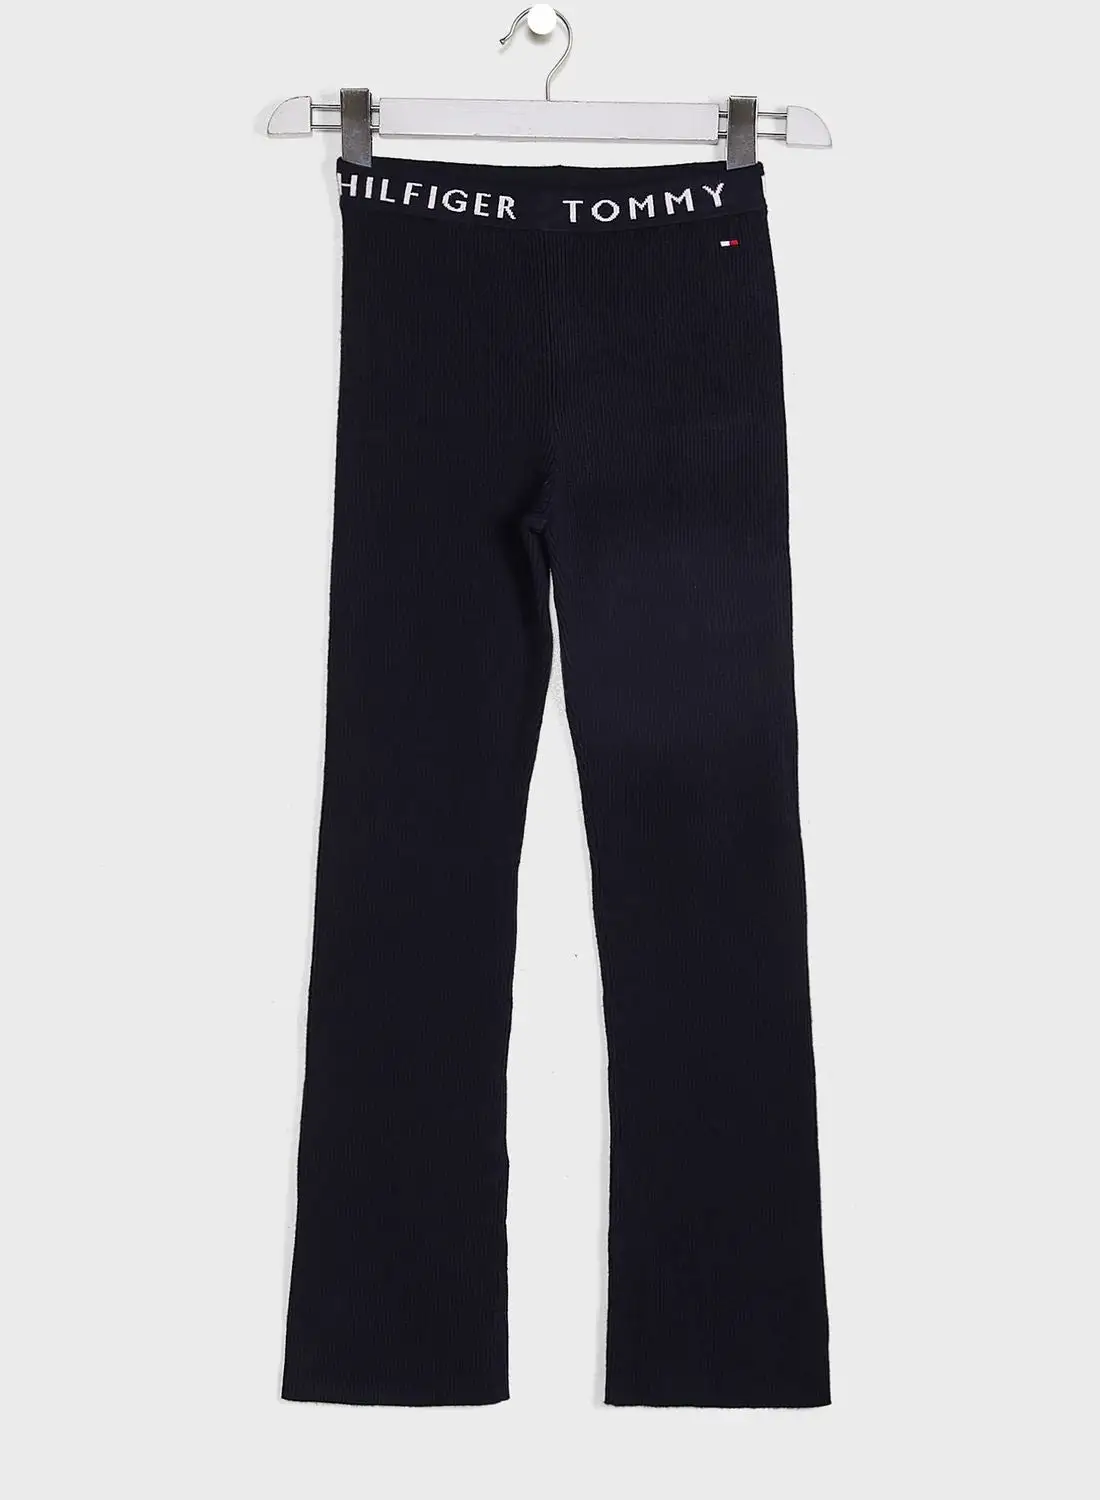 TOMMY HILFIGER Youth Essential Trousers